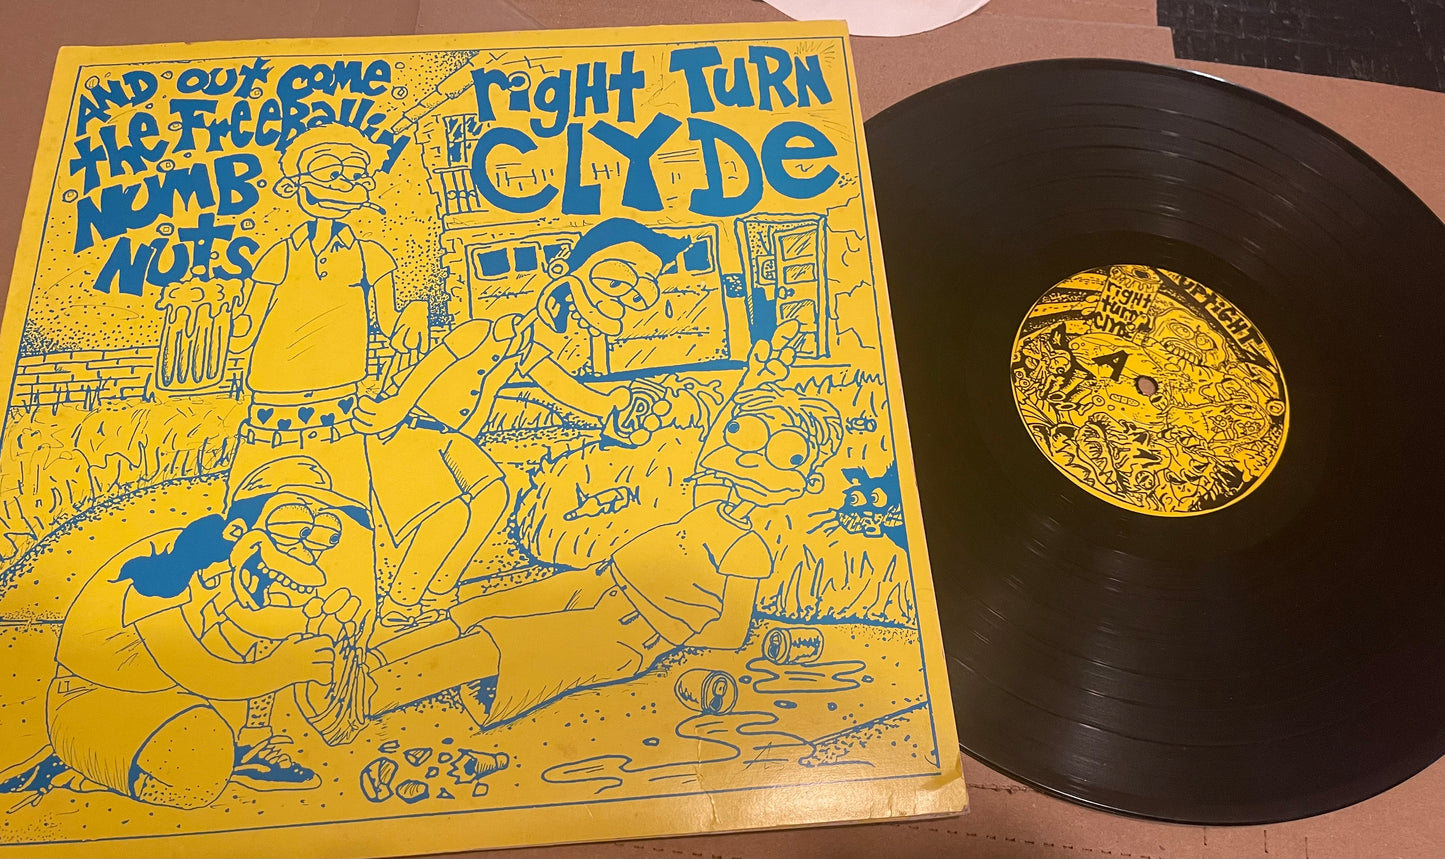 OMRDST-038 RIGHT TURN CLYDE “And Out Come The Freeballin’ Numbnuts” LP (1996)